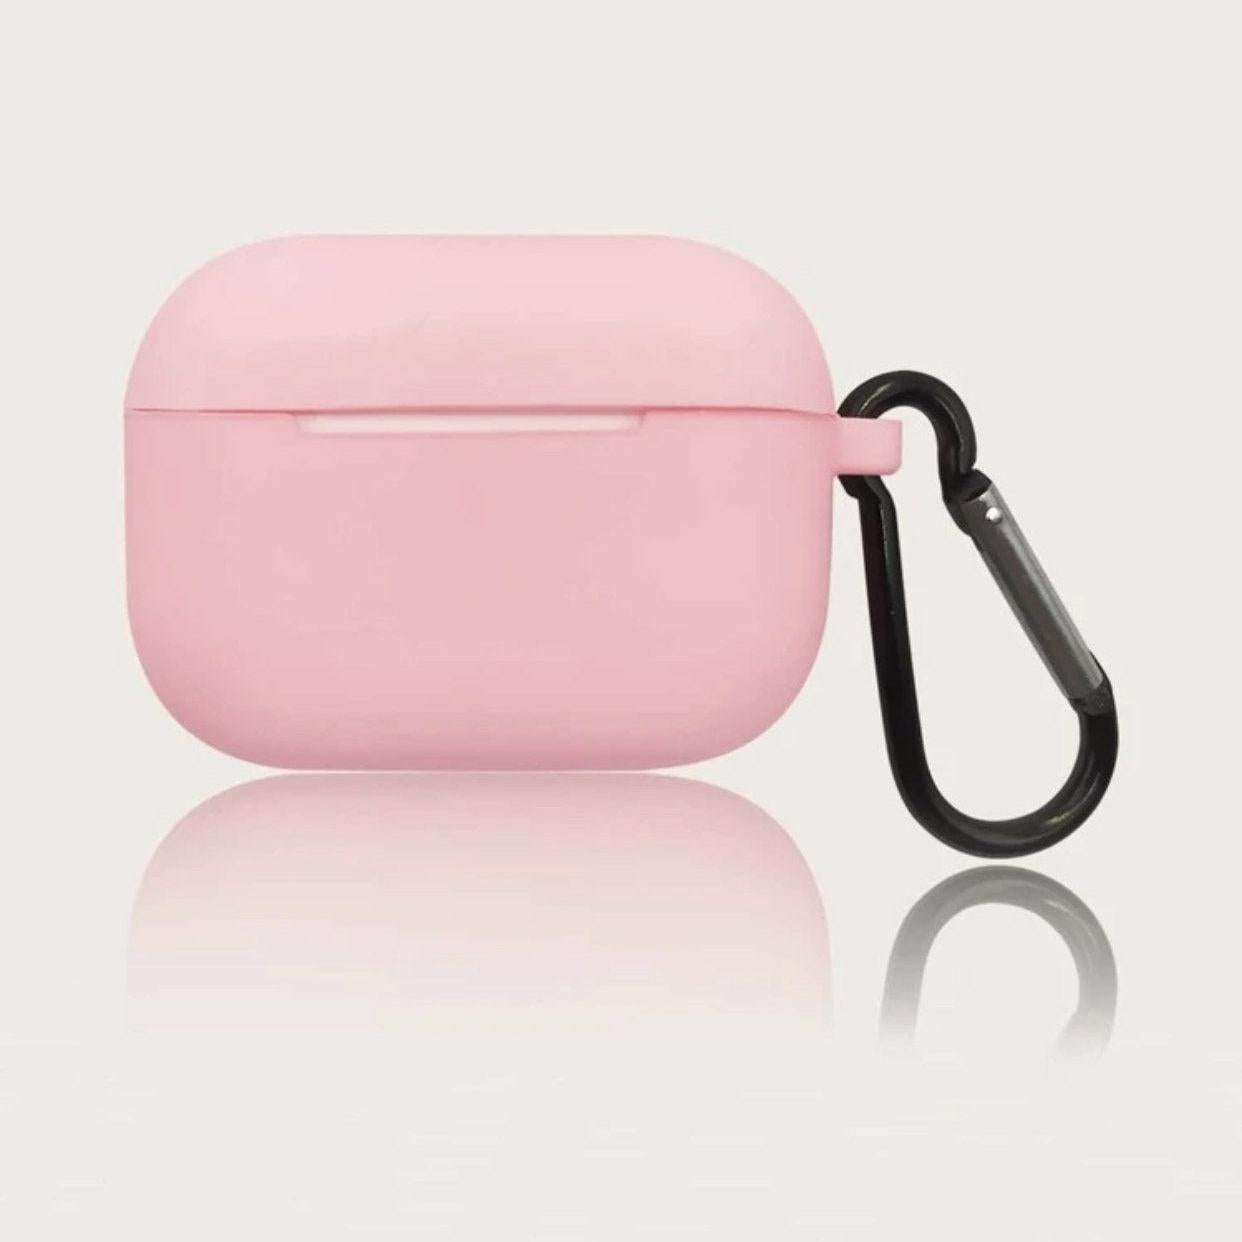 AirPods Pro Silicone Case Sweet Pink Anca's Store 